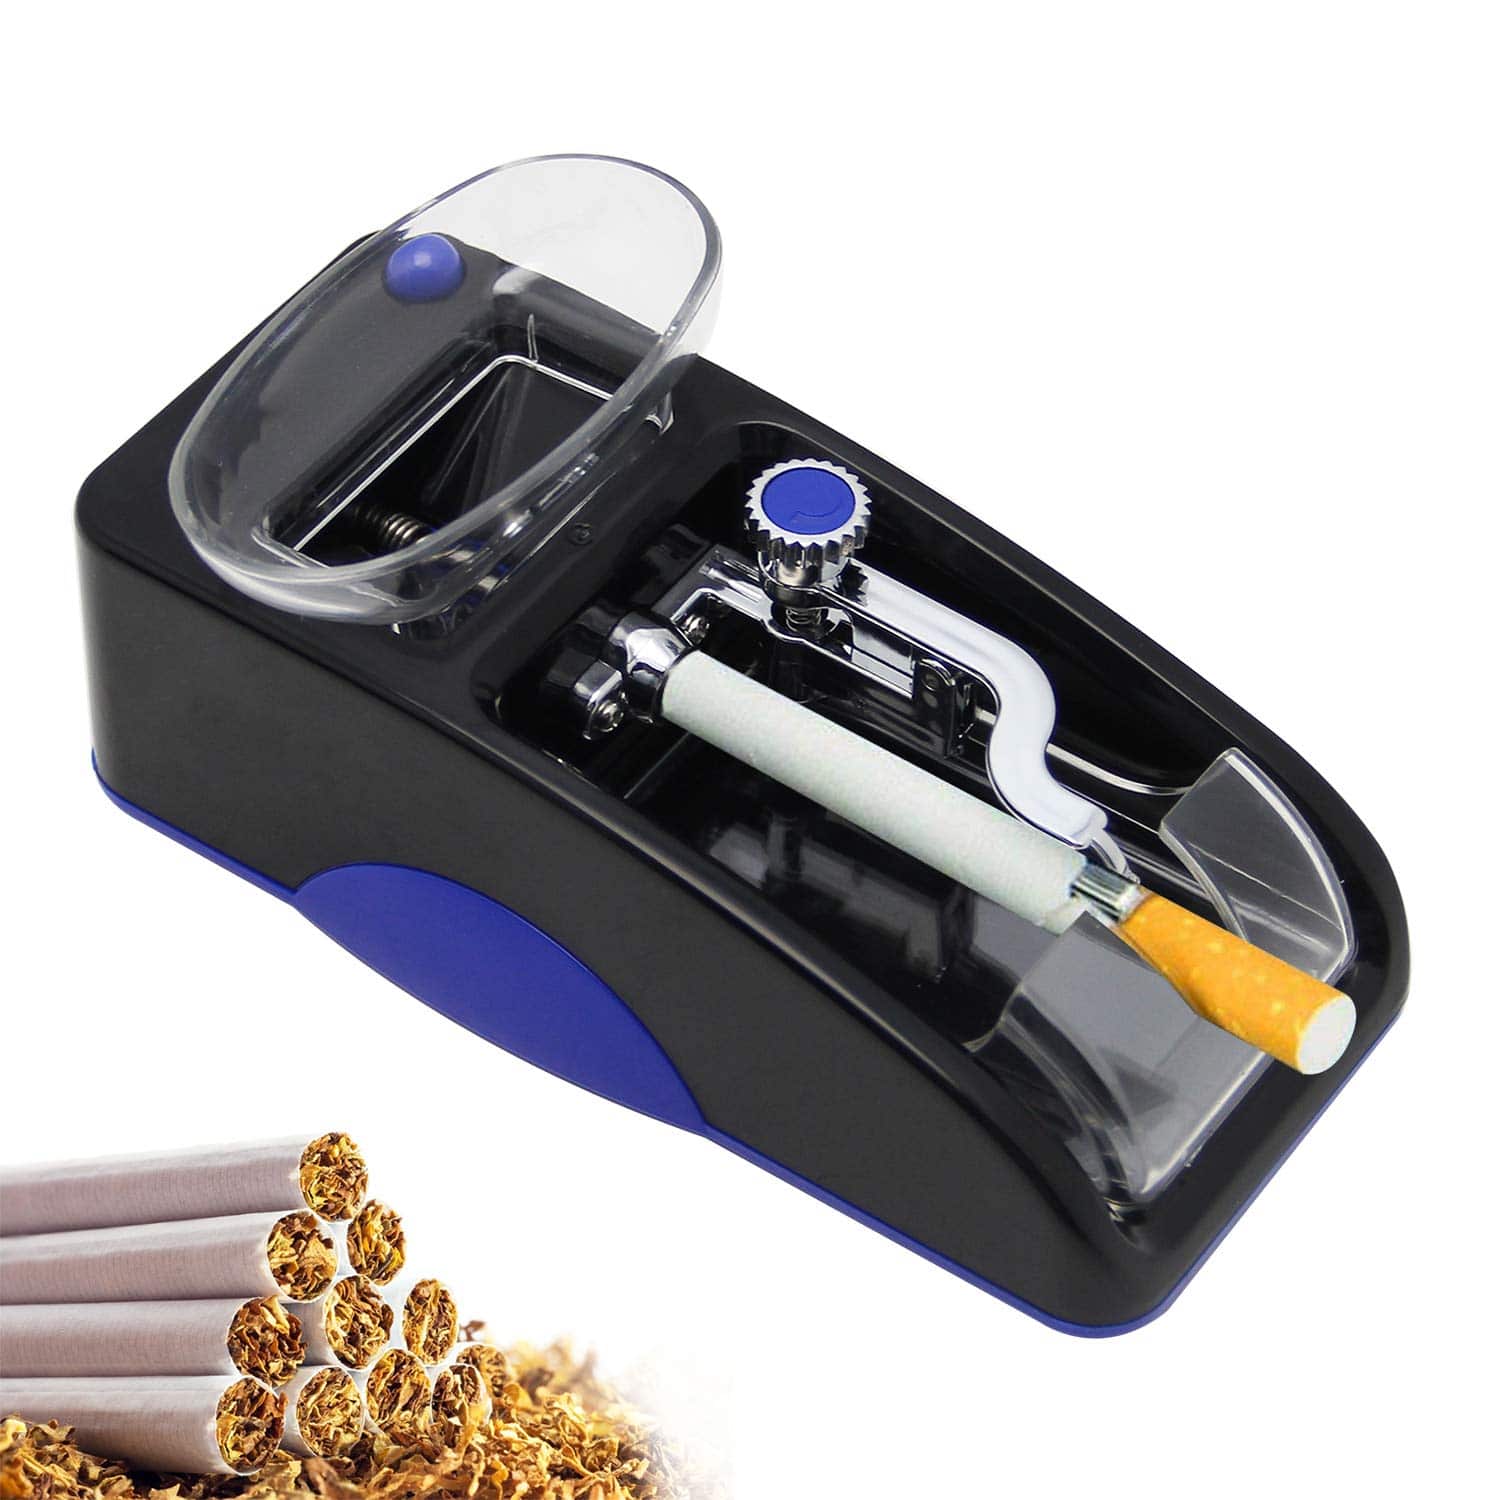 15 Best Cigarette rolling machine in [year] | Deals, Review 4